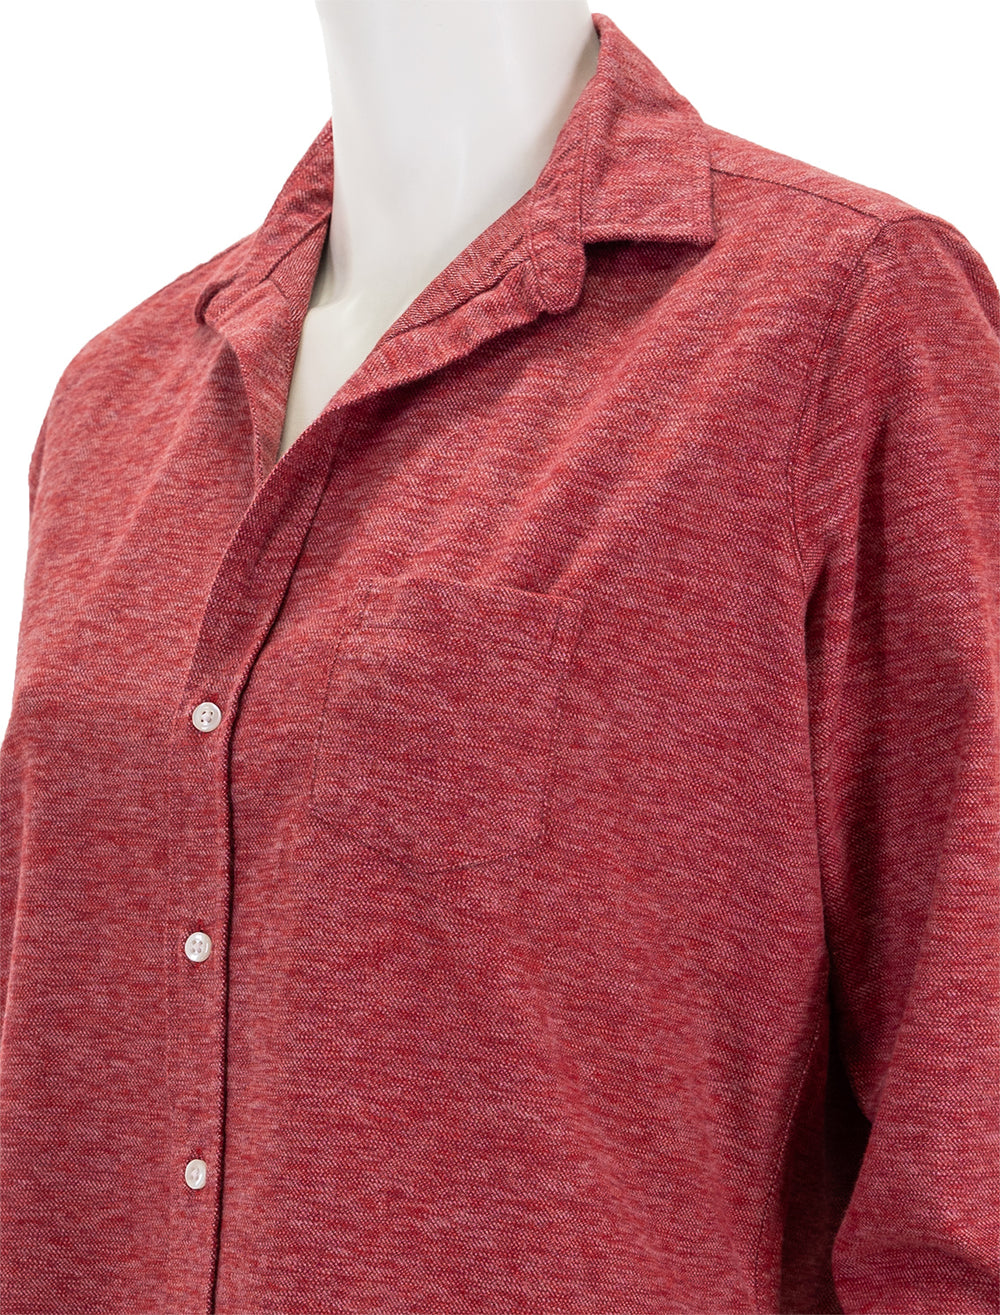 Close-up view of Frank & Eileen's eileen shirt in heather red.